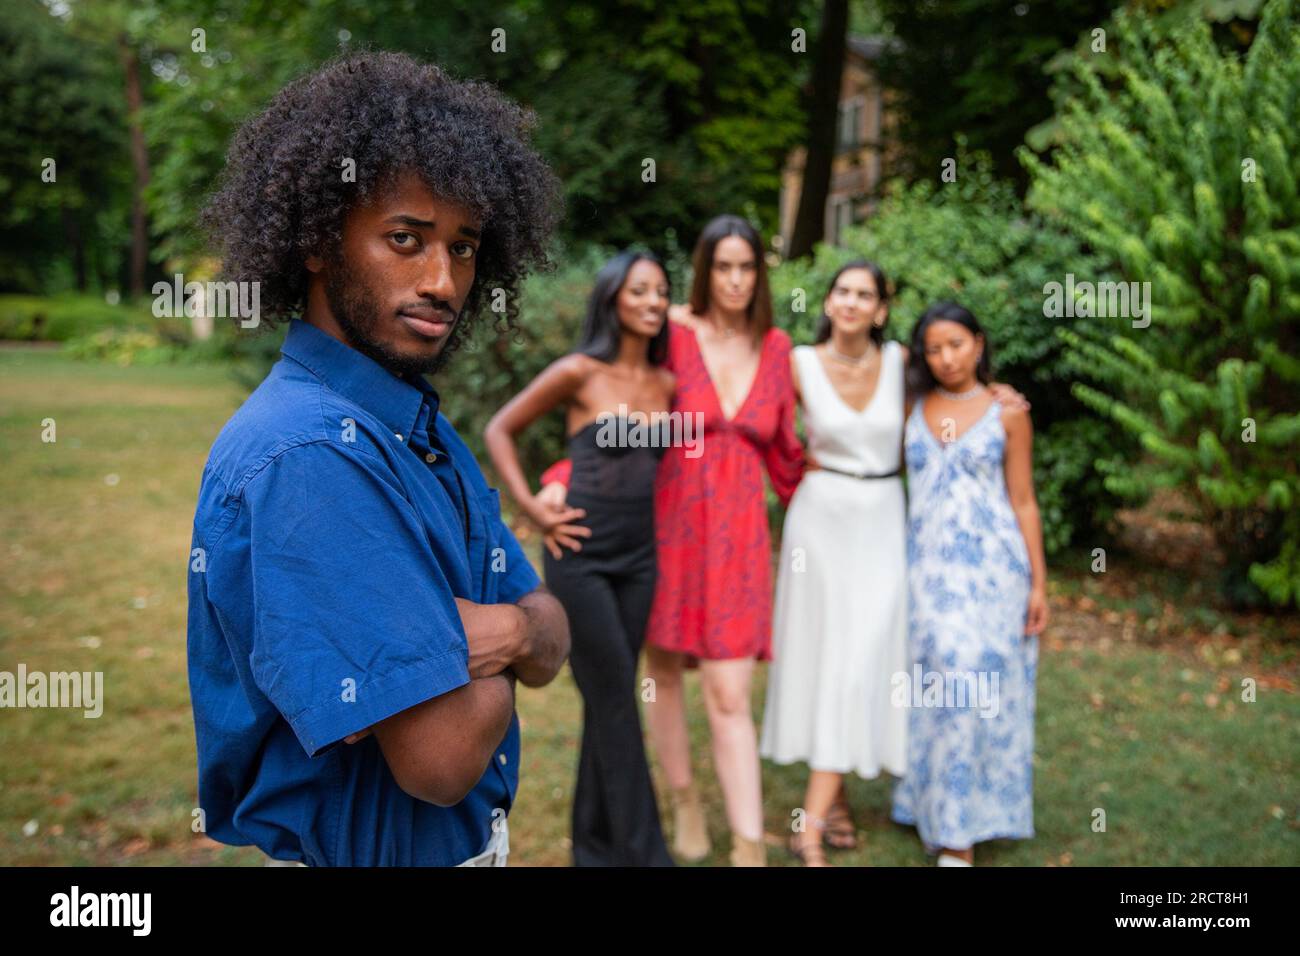 Portrait of an African boy with 4 girls looking at him in the background, multi ethnic group Stock Photo